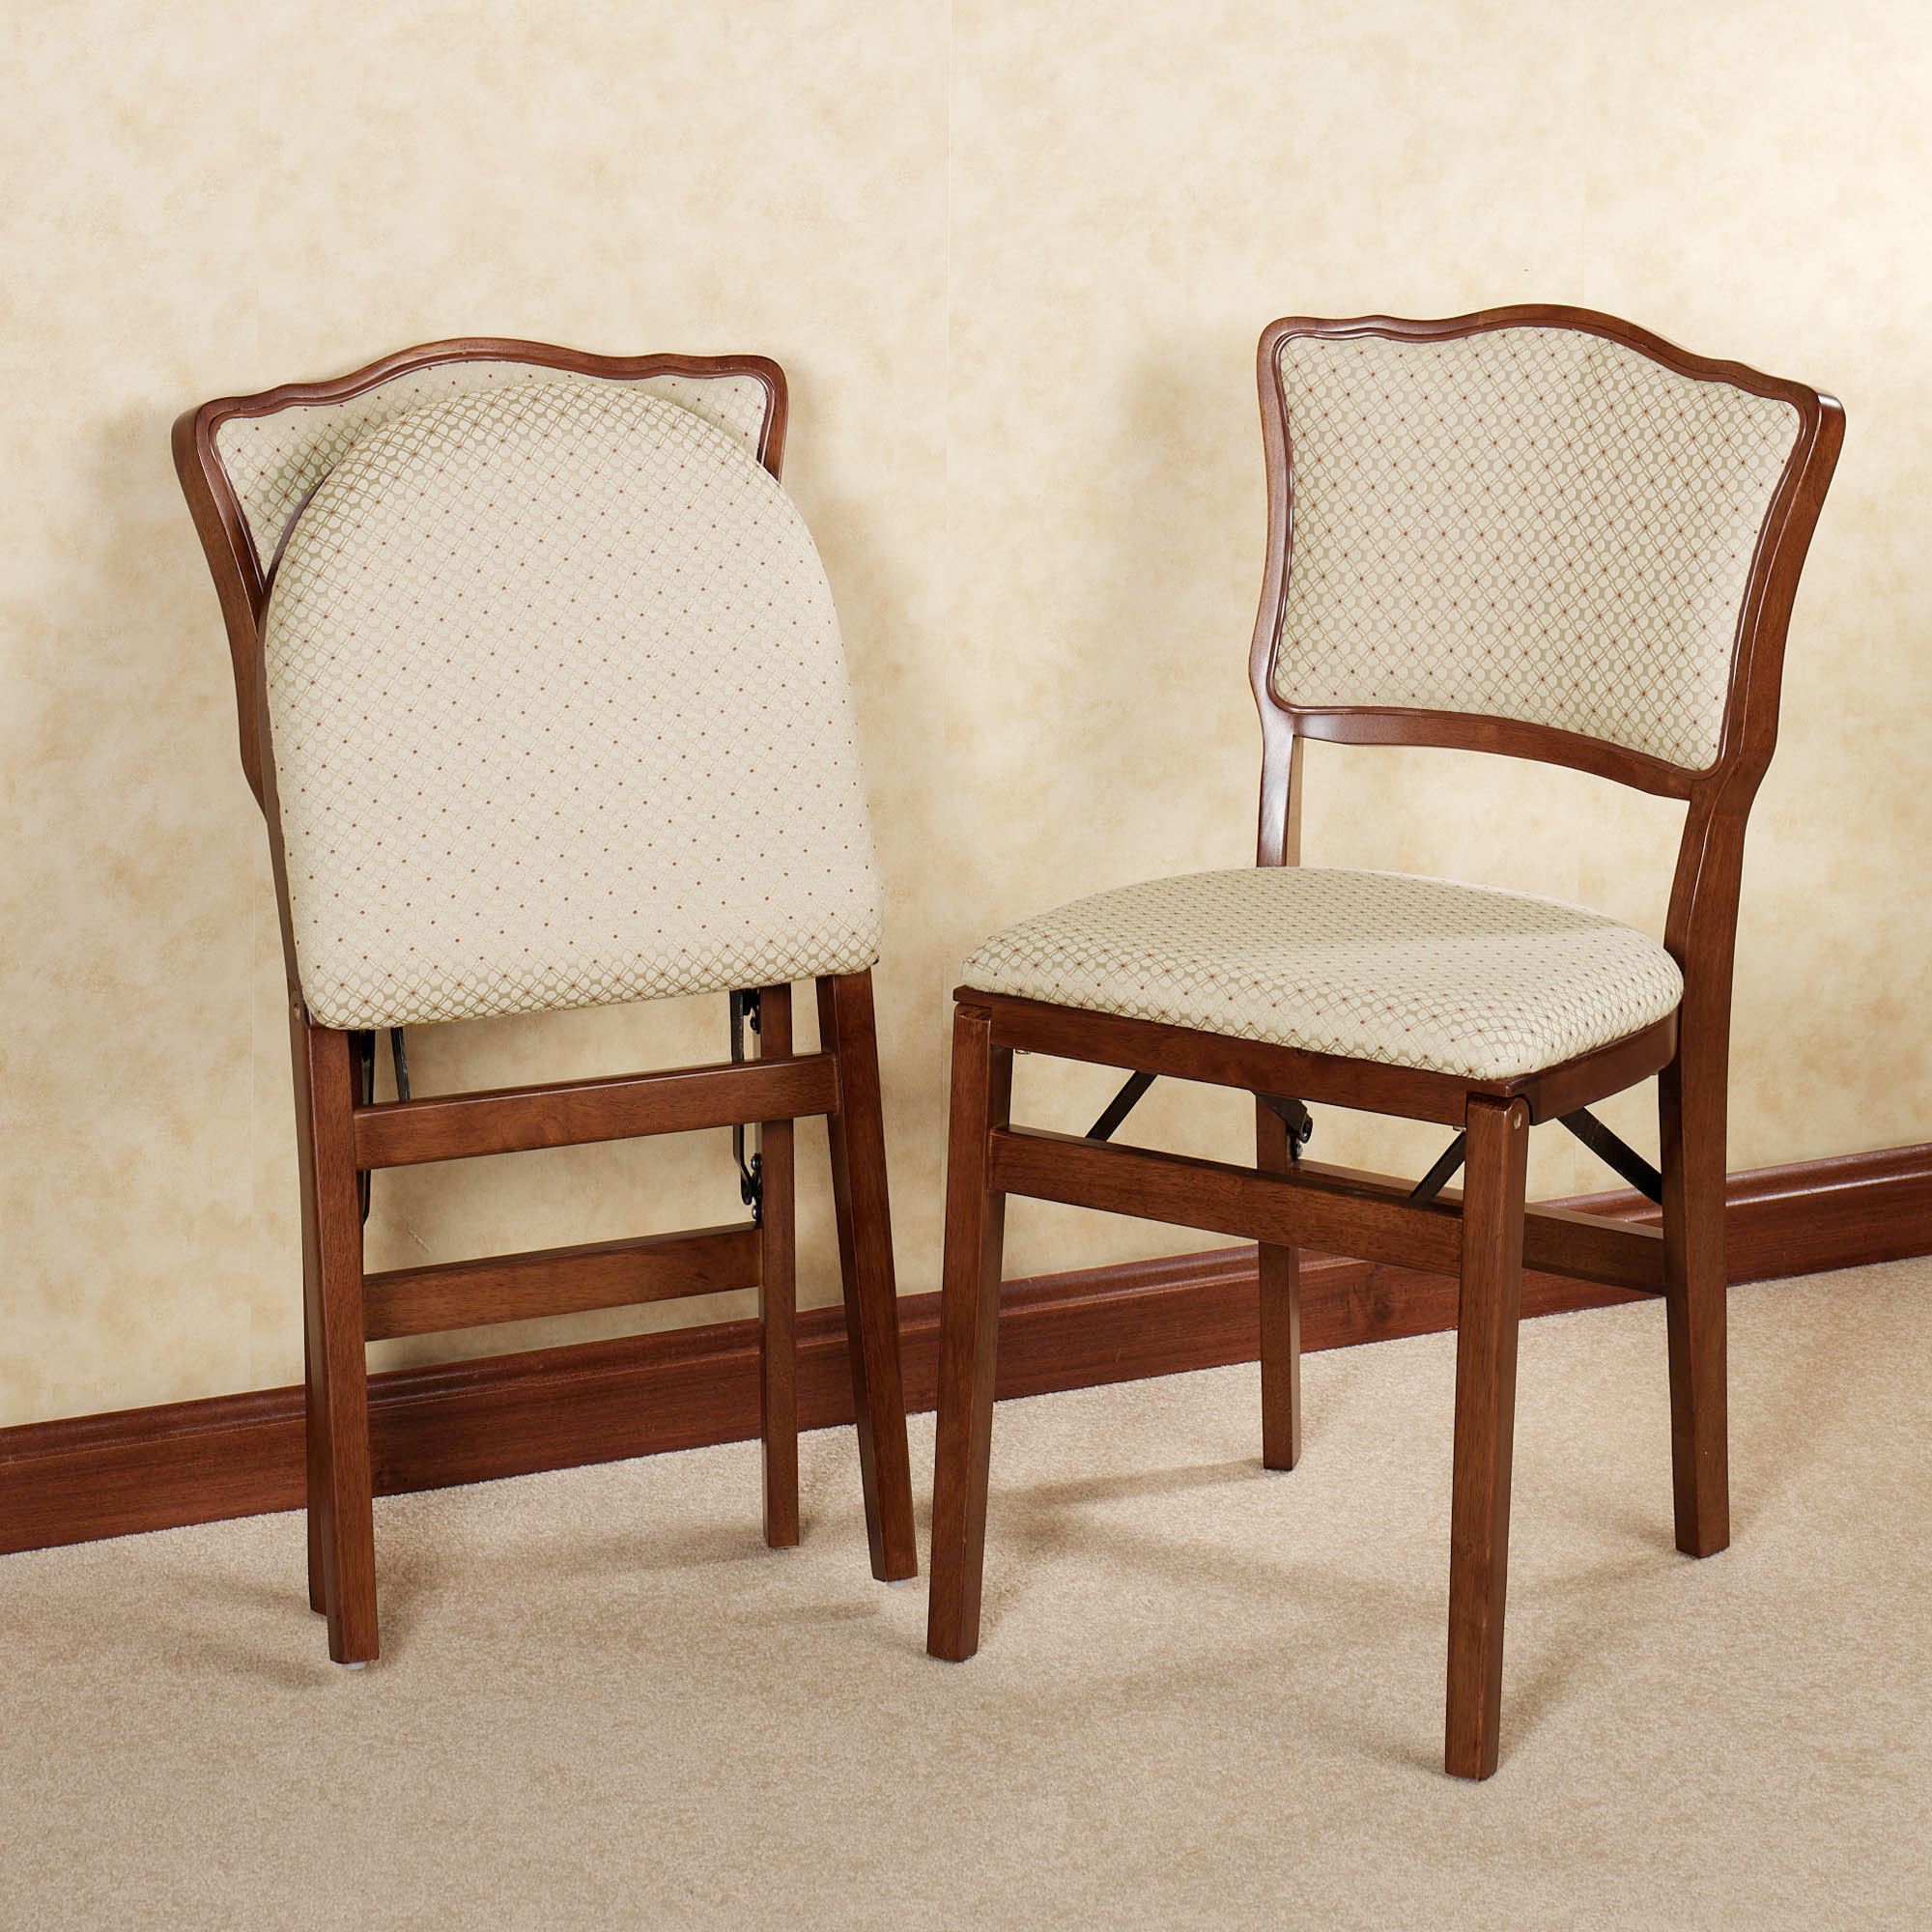 Folding chairs you might also consider.  Dover Cane folding chair ... ELSTOFD